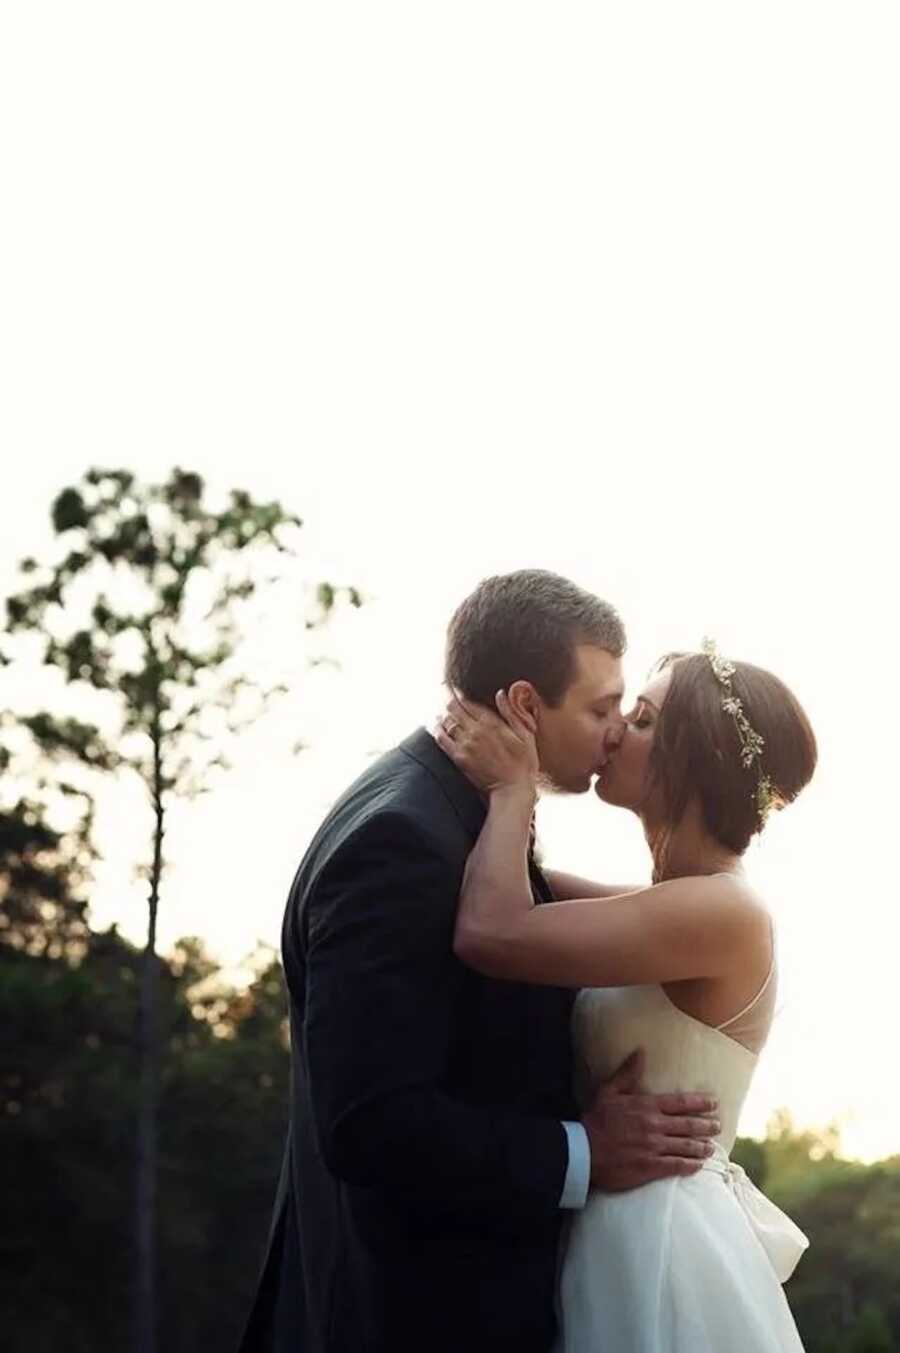 husband and wife on their wedding day kiss one another